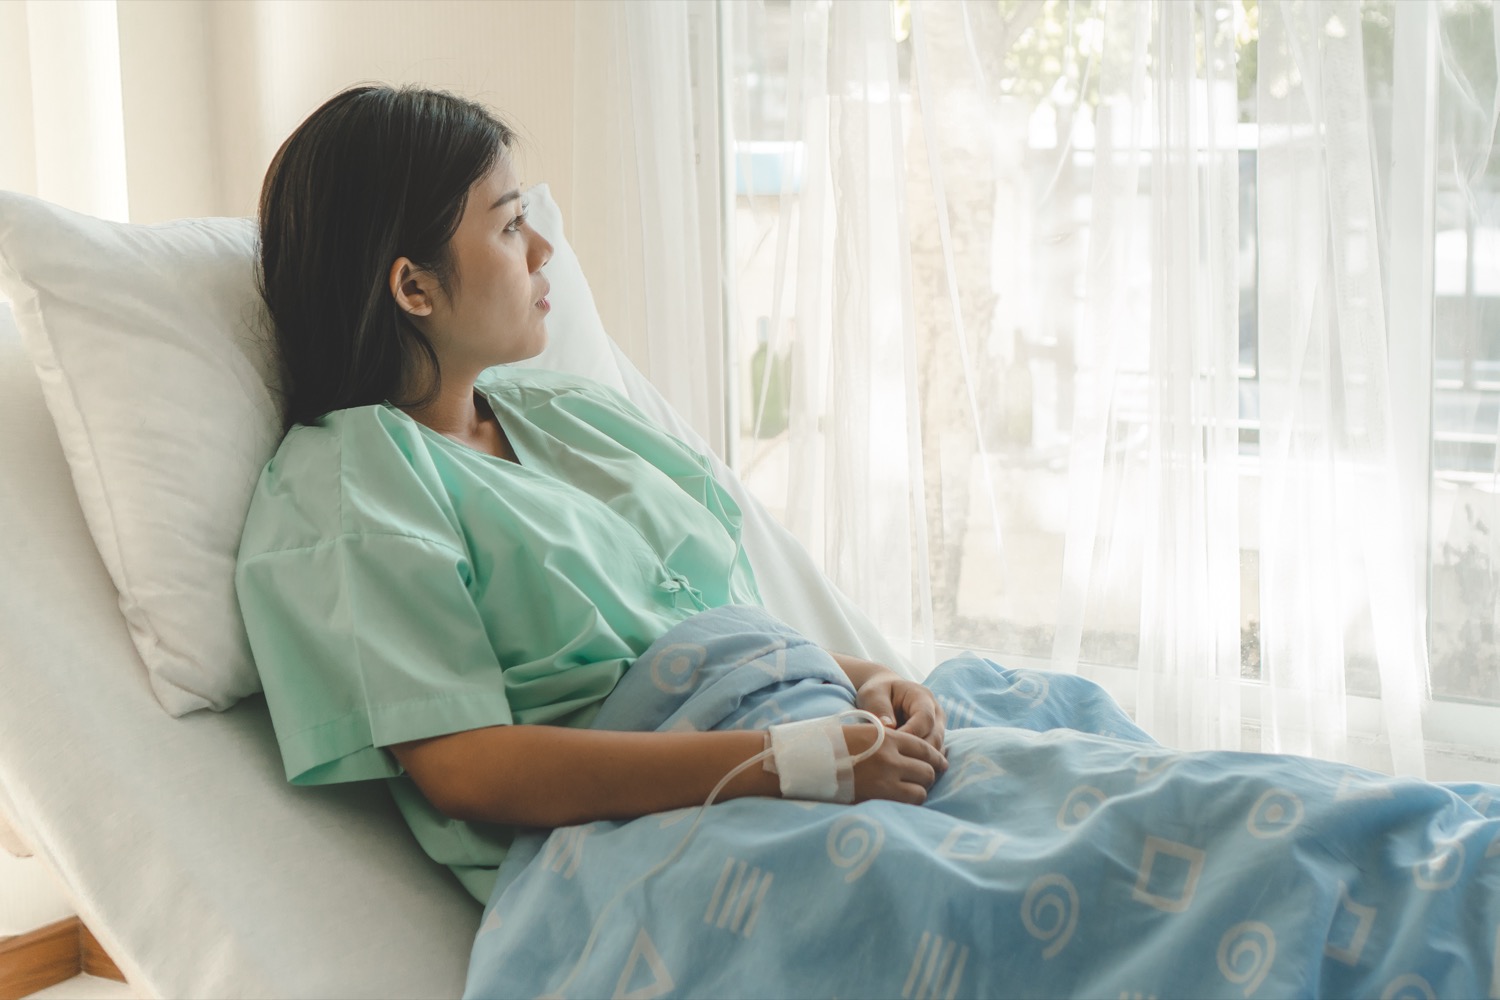 an asian woman on a hospital bed wearing a hospital gown sitting partially upright with her lower half covered by a blanket, looking out the window